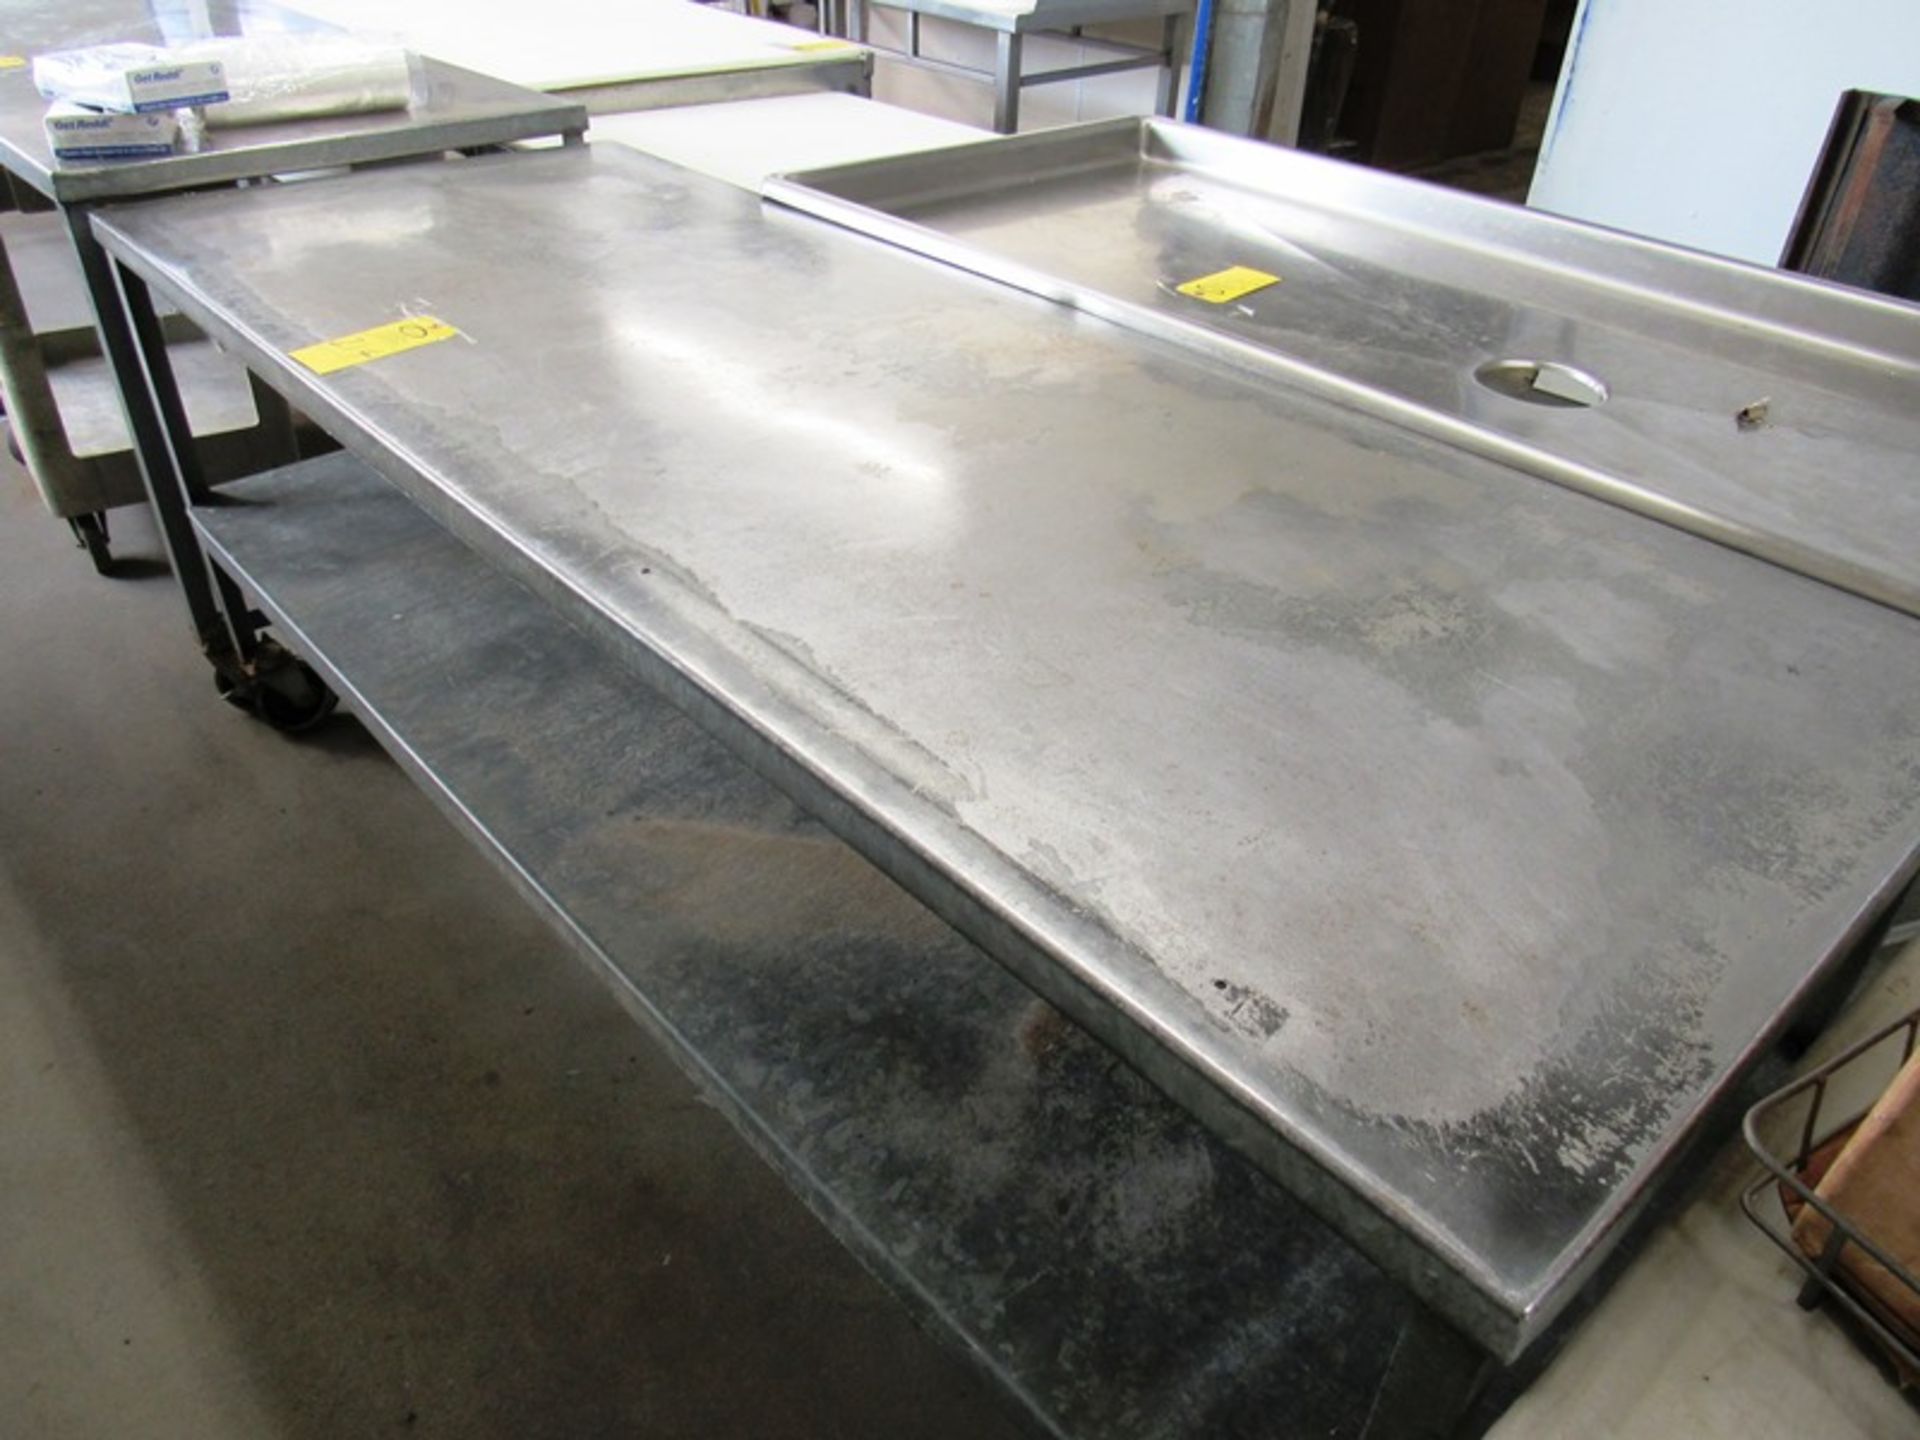 84" x 32" Galvanized Table W/Under Shelf on Casters(All Funds Must Be Received by Friday, December